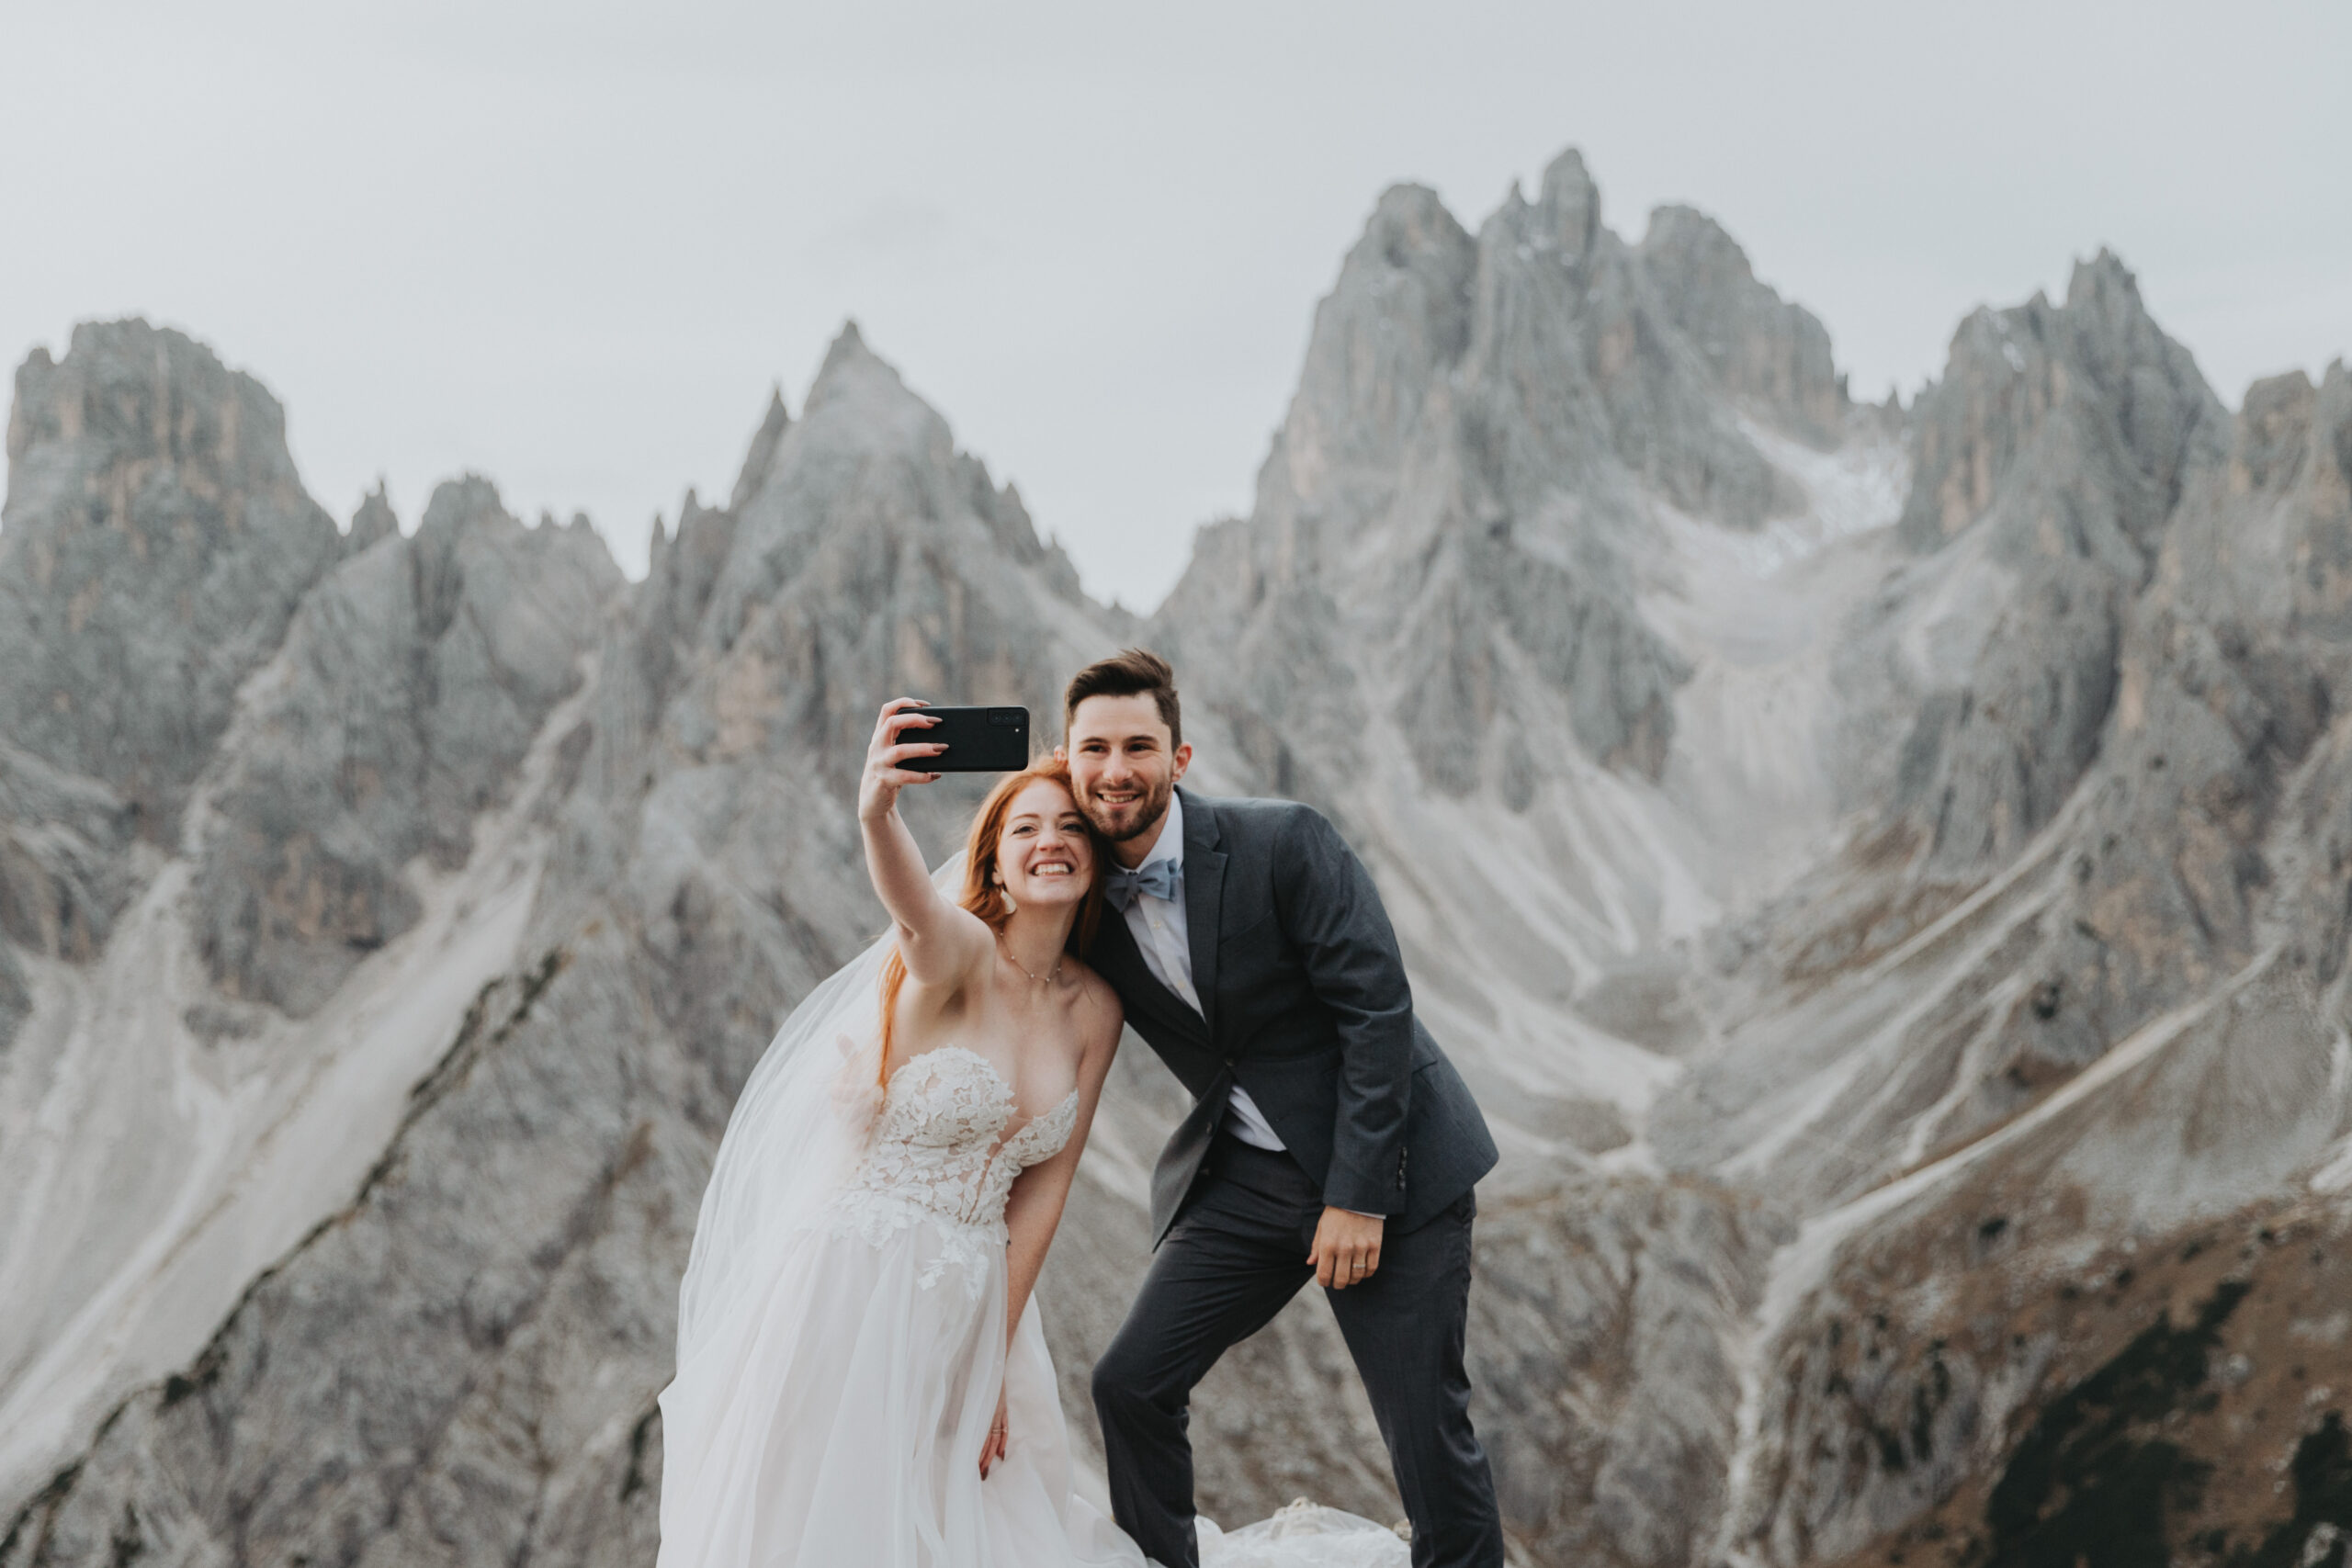 A couple poses for a selfie while they're eloping at Cadini di Misurina, an impressive mountain peak in the Italian Dolomites